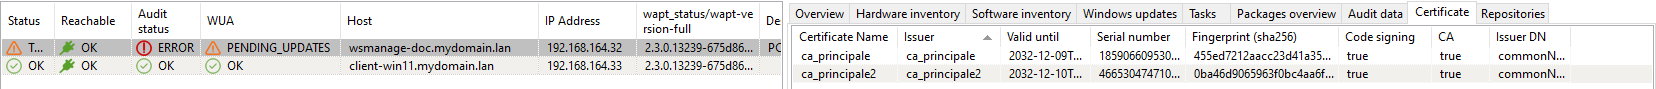 Window showing the certificates trusted by the selected host